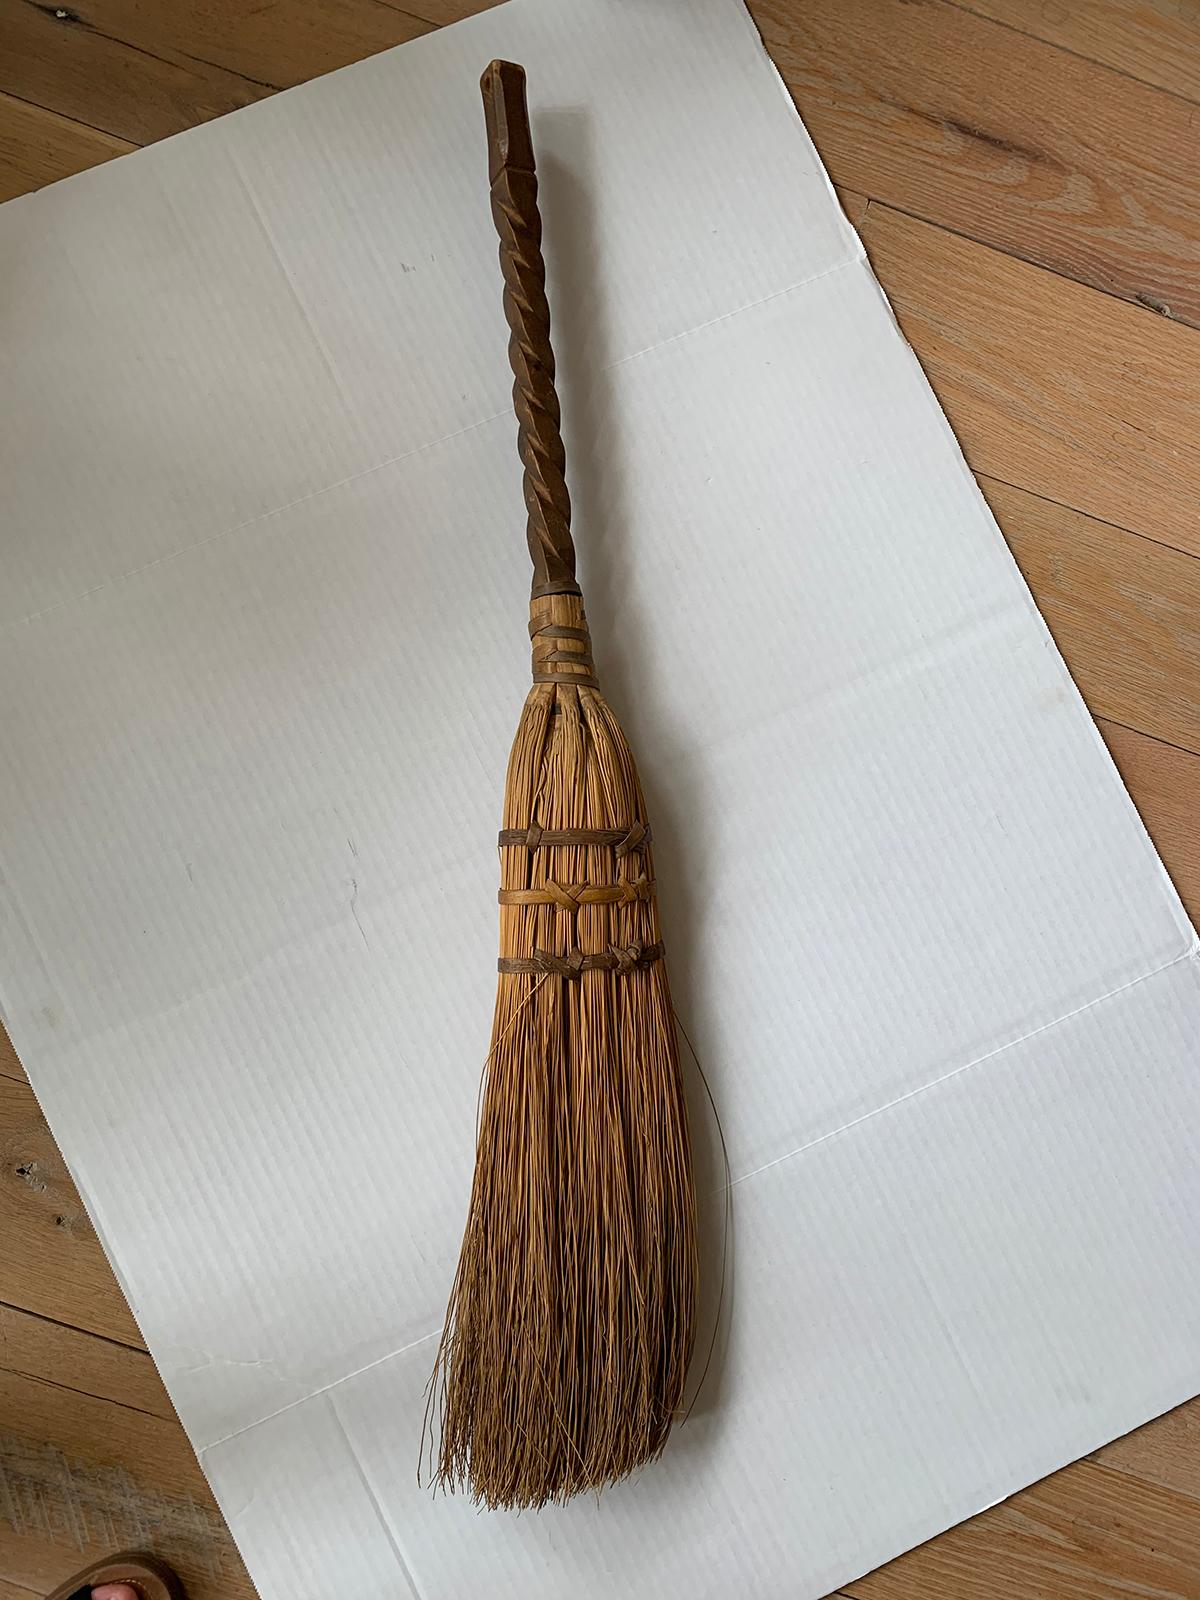 20th century broom with wooden handle.